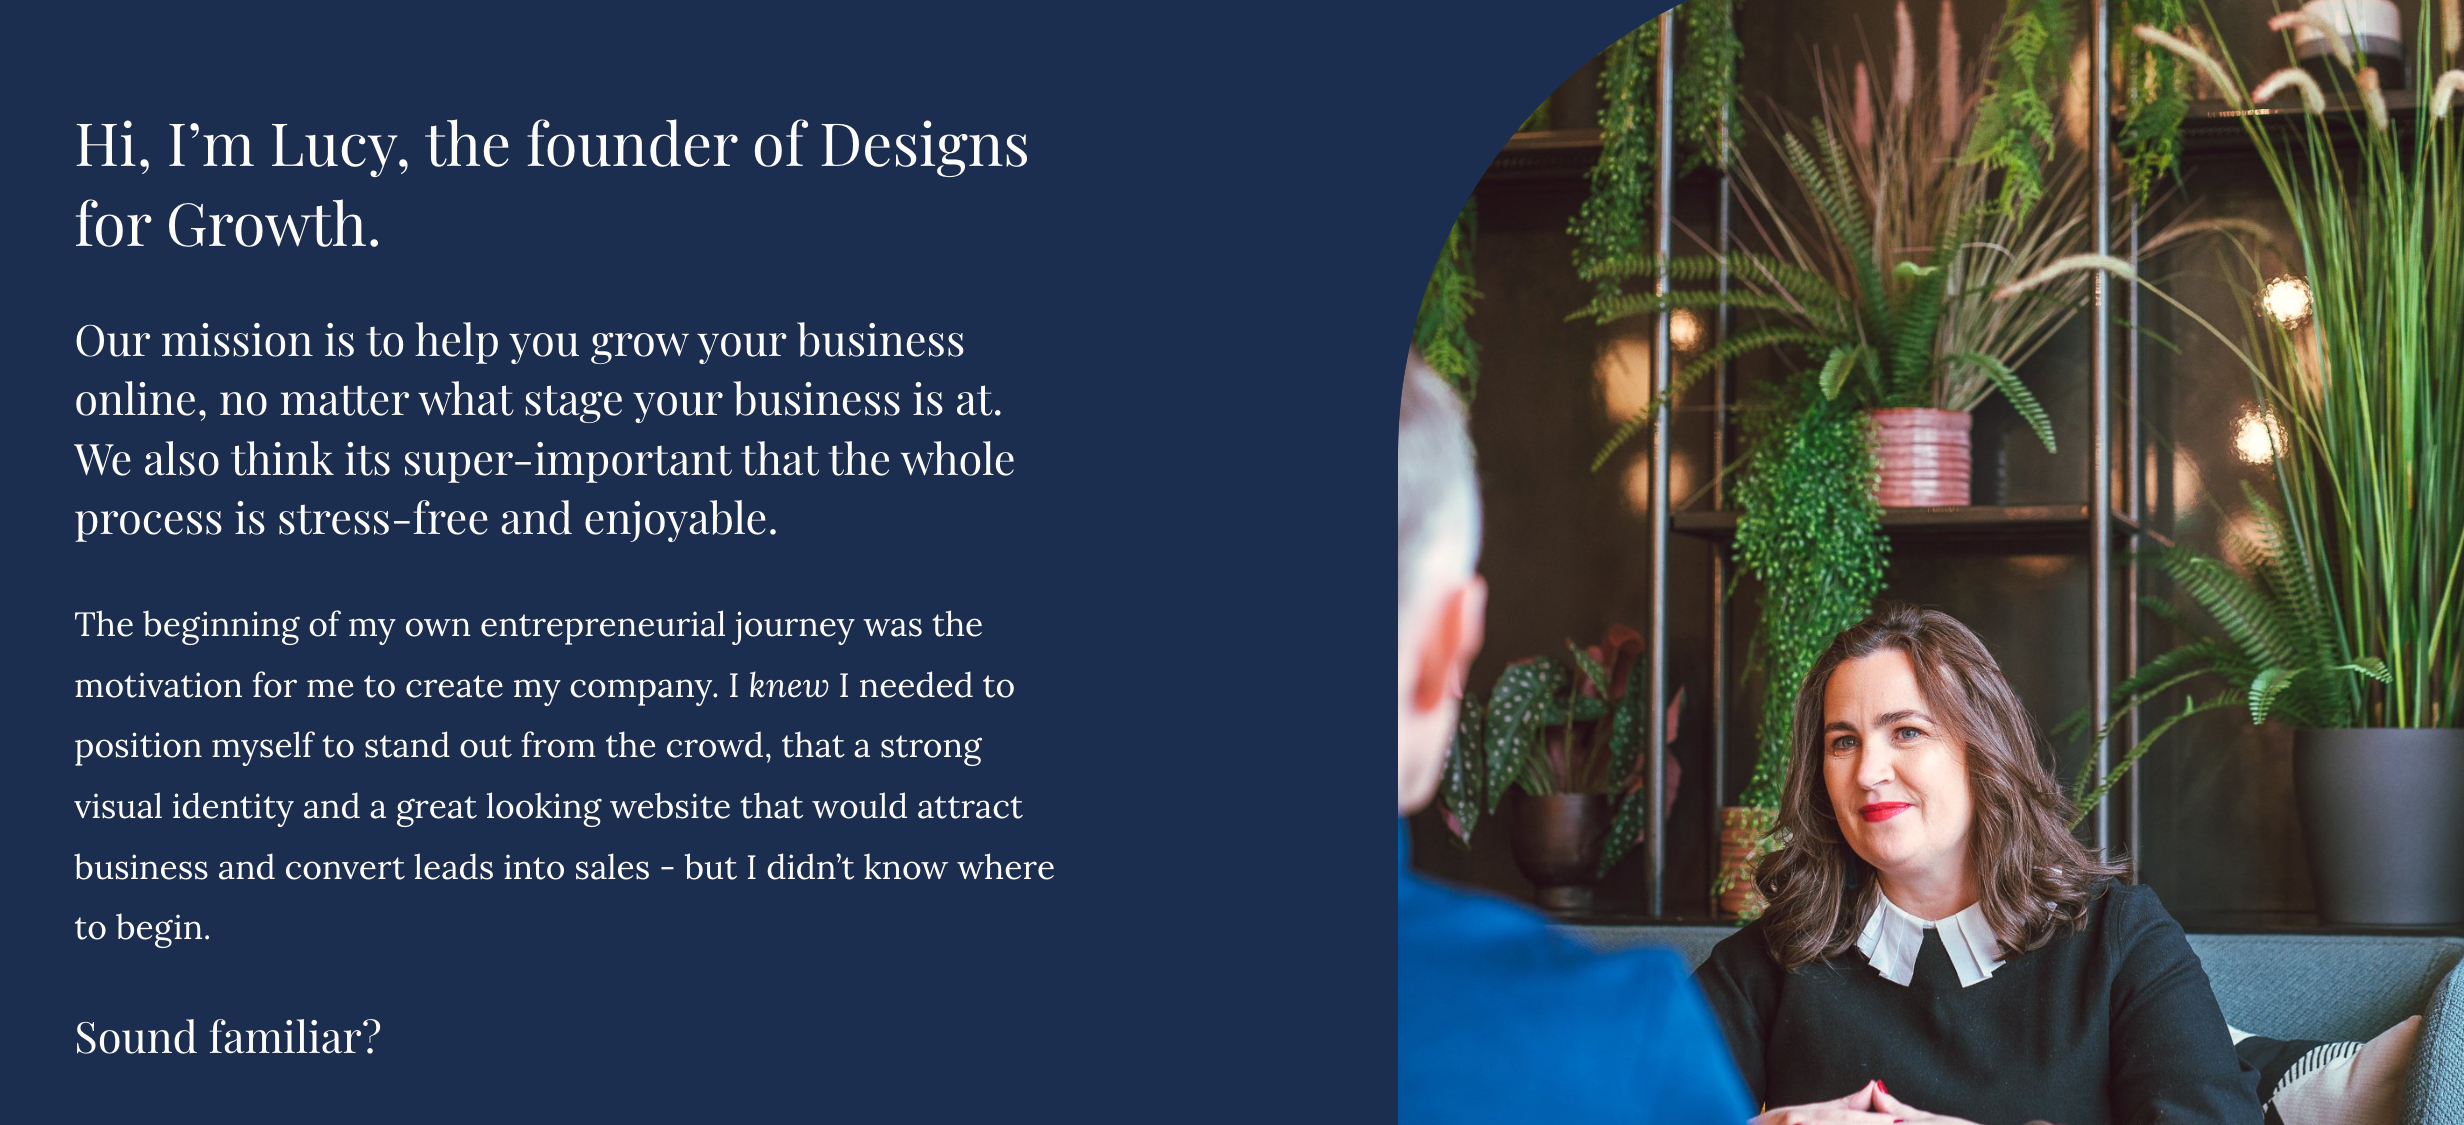 Screenshot of DFG website. Copy says "Hi, I’m Lucy, the founder of Designs for Growth.<br />
Our mission is to help you grow your business online, no matter what stage your business is at. We also think its super-important that the whole process is stress-free and enjoyable.<br />
The beginning of my own entrepreneurial journey was the motivation for me to create my company. I knew I needed to position myself to stand out from the crowd, that a strong visual identity and a great looking website that would attract business and convert leads into sales - but I didn’t know where to begin.</p>
<p>Sound familiar?"